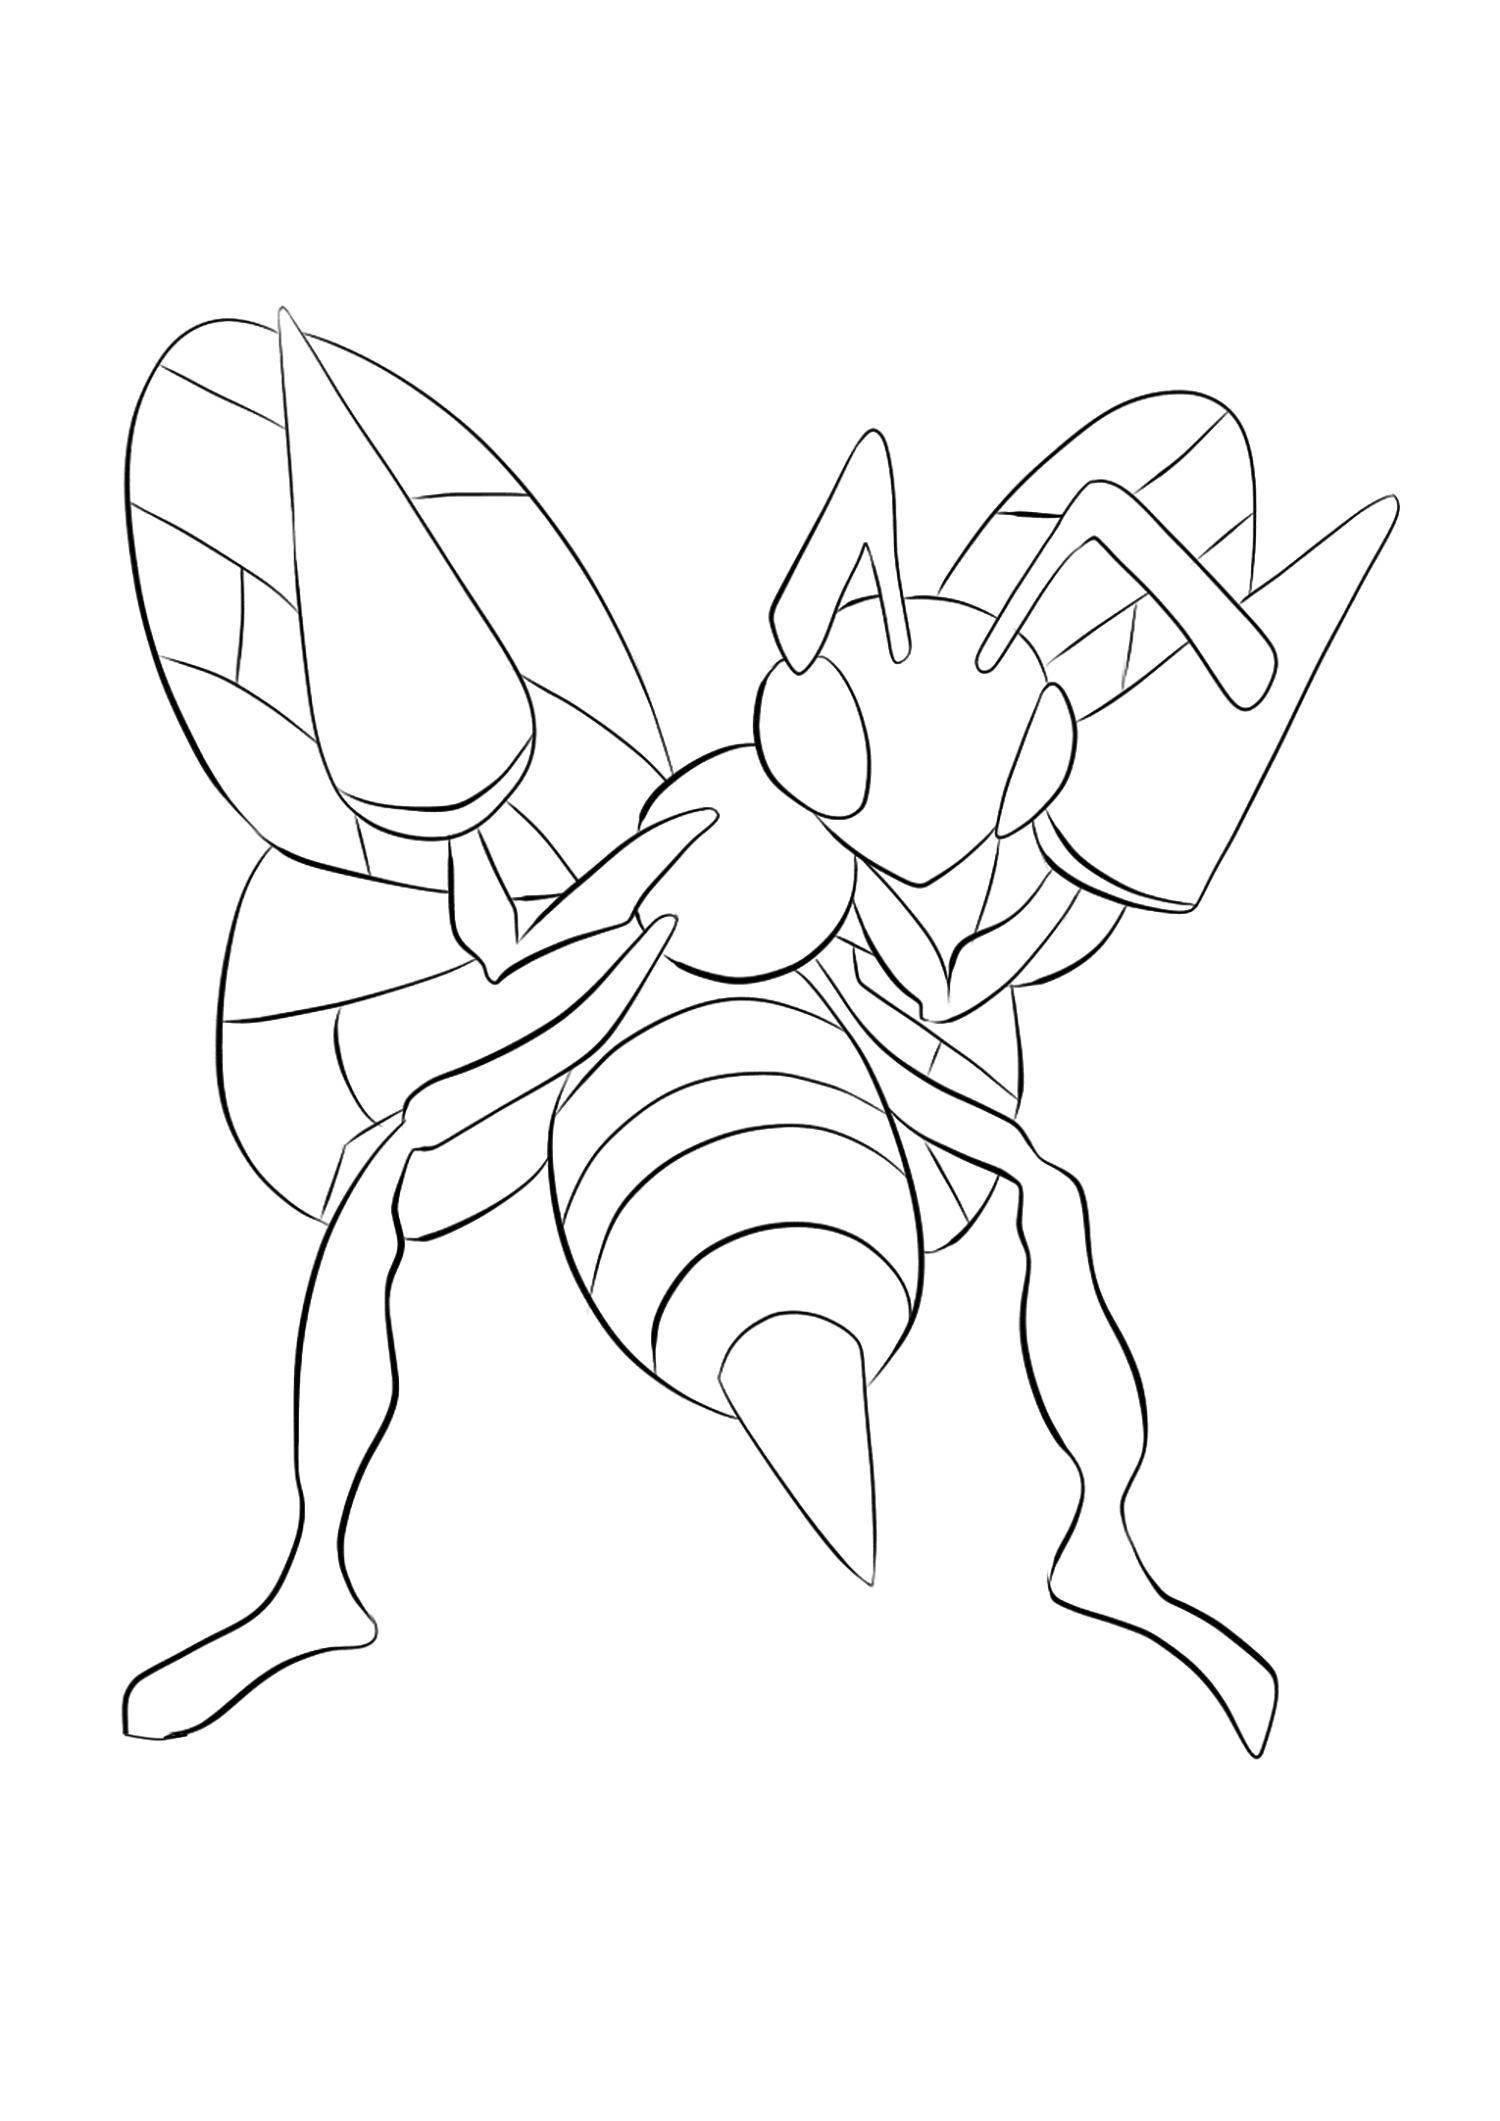 Beedrill (No.15)Beedrill Coloring page, Generation I Pokemon of type Bug and PoisonOriginal image credit: Pokemon linearts by Lilly Gerbil'font-size:smaller;color:gray'>Permission: All rights reserved © Pokemon company and Ken Sugimori.